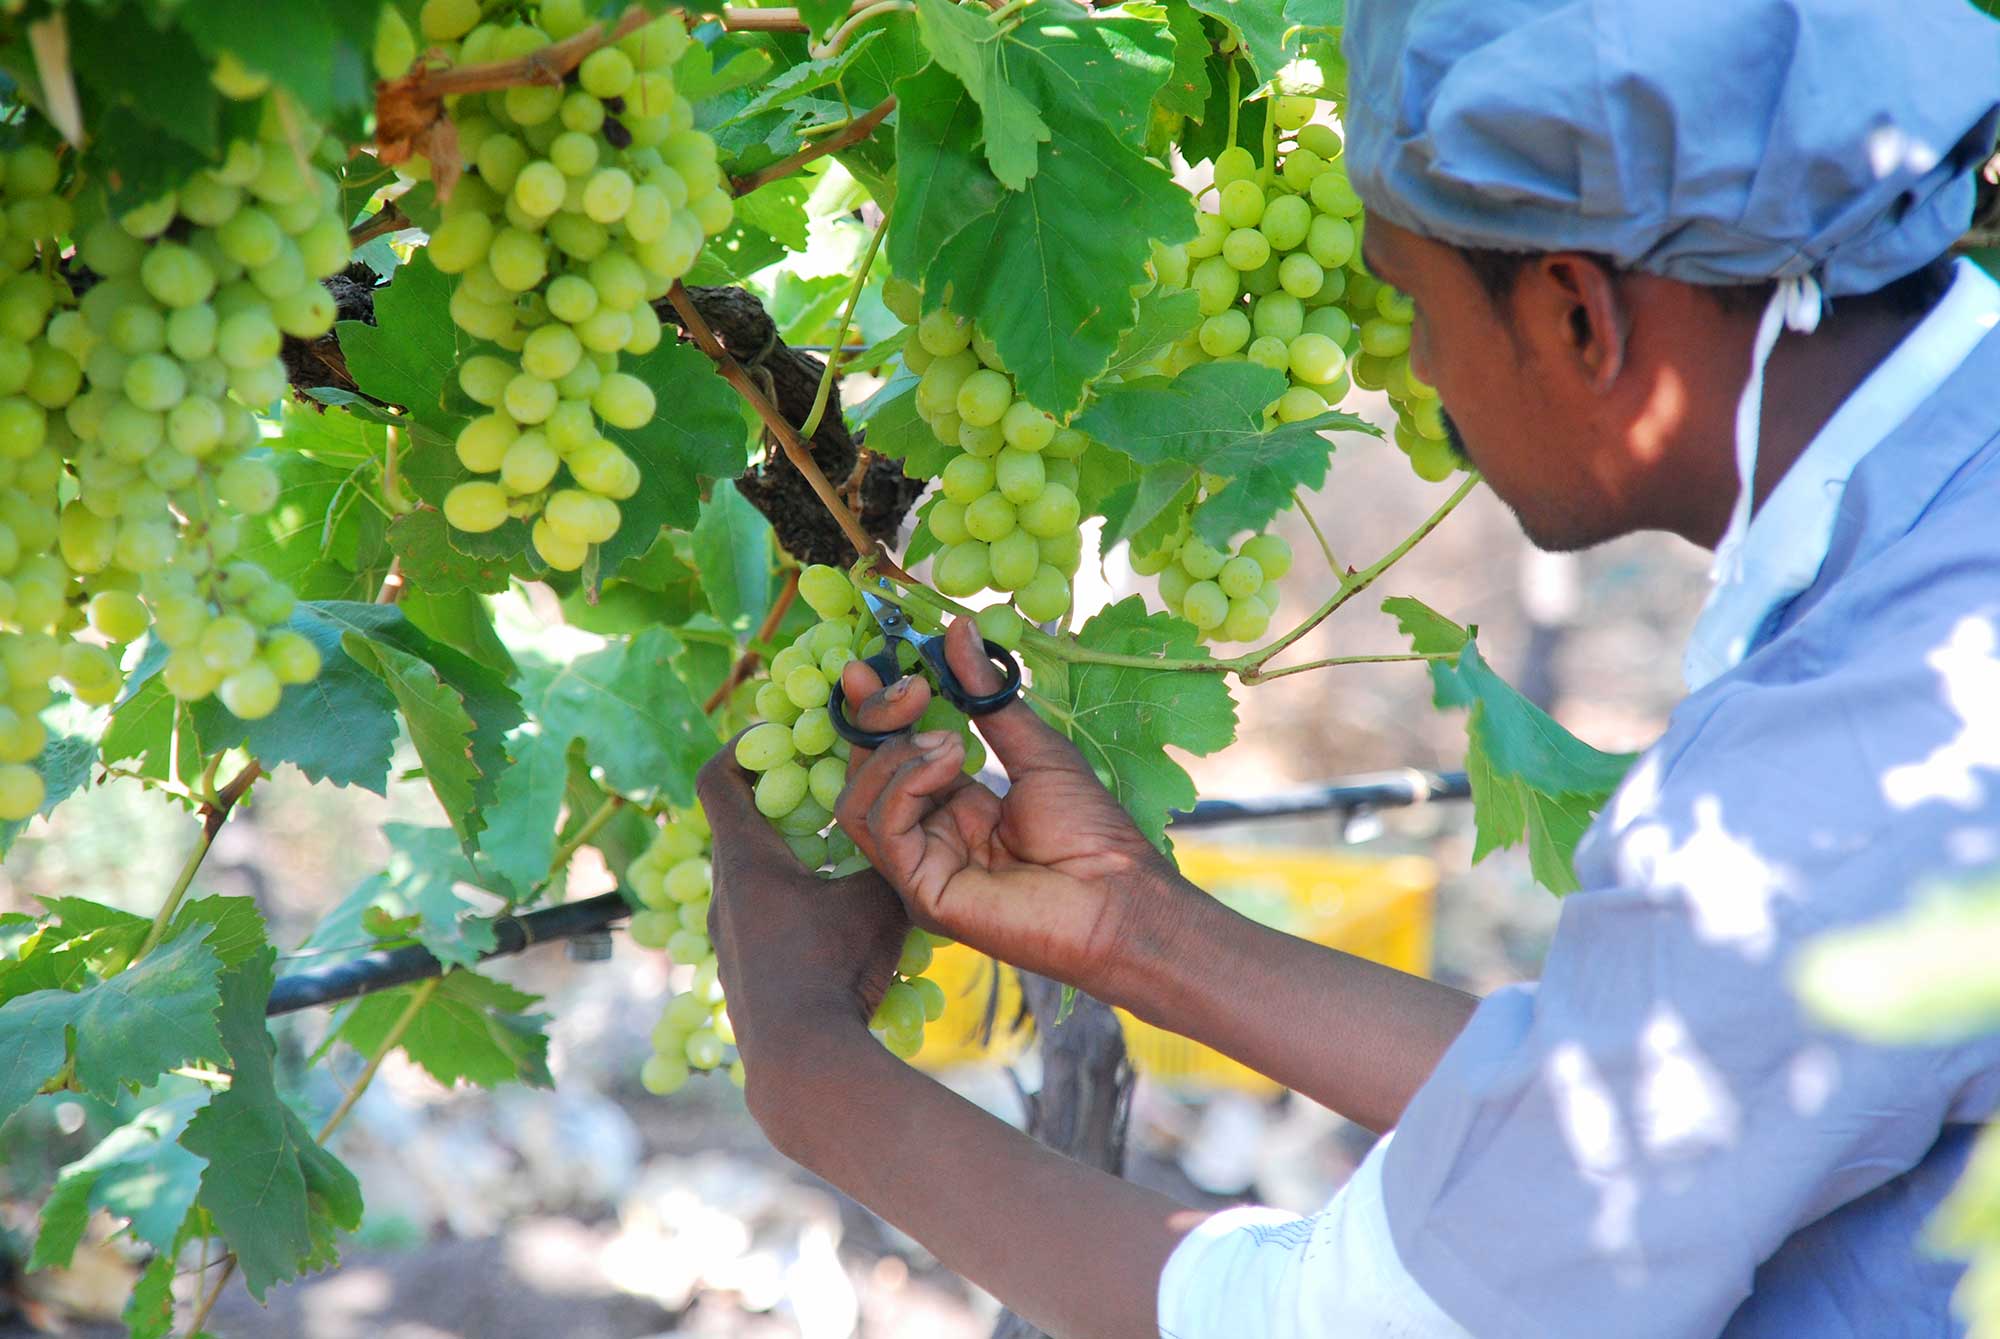 A man collecting grapes in an field in India. Copyright: Mersel.